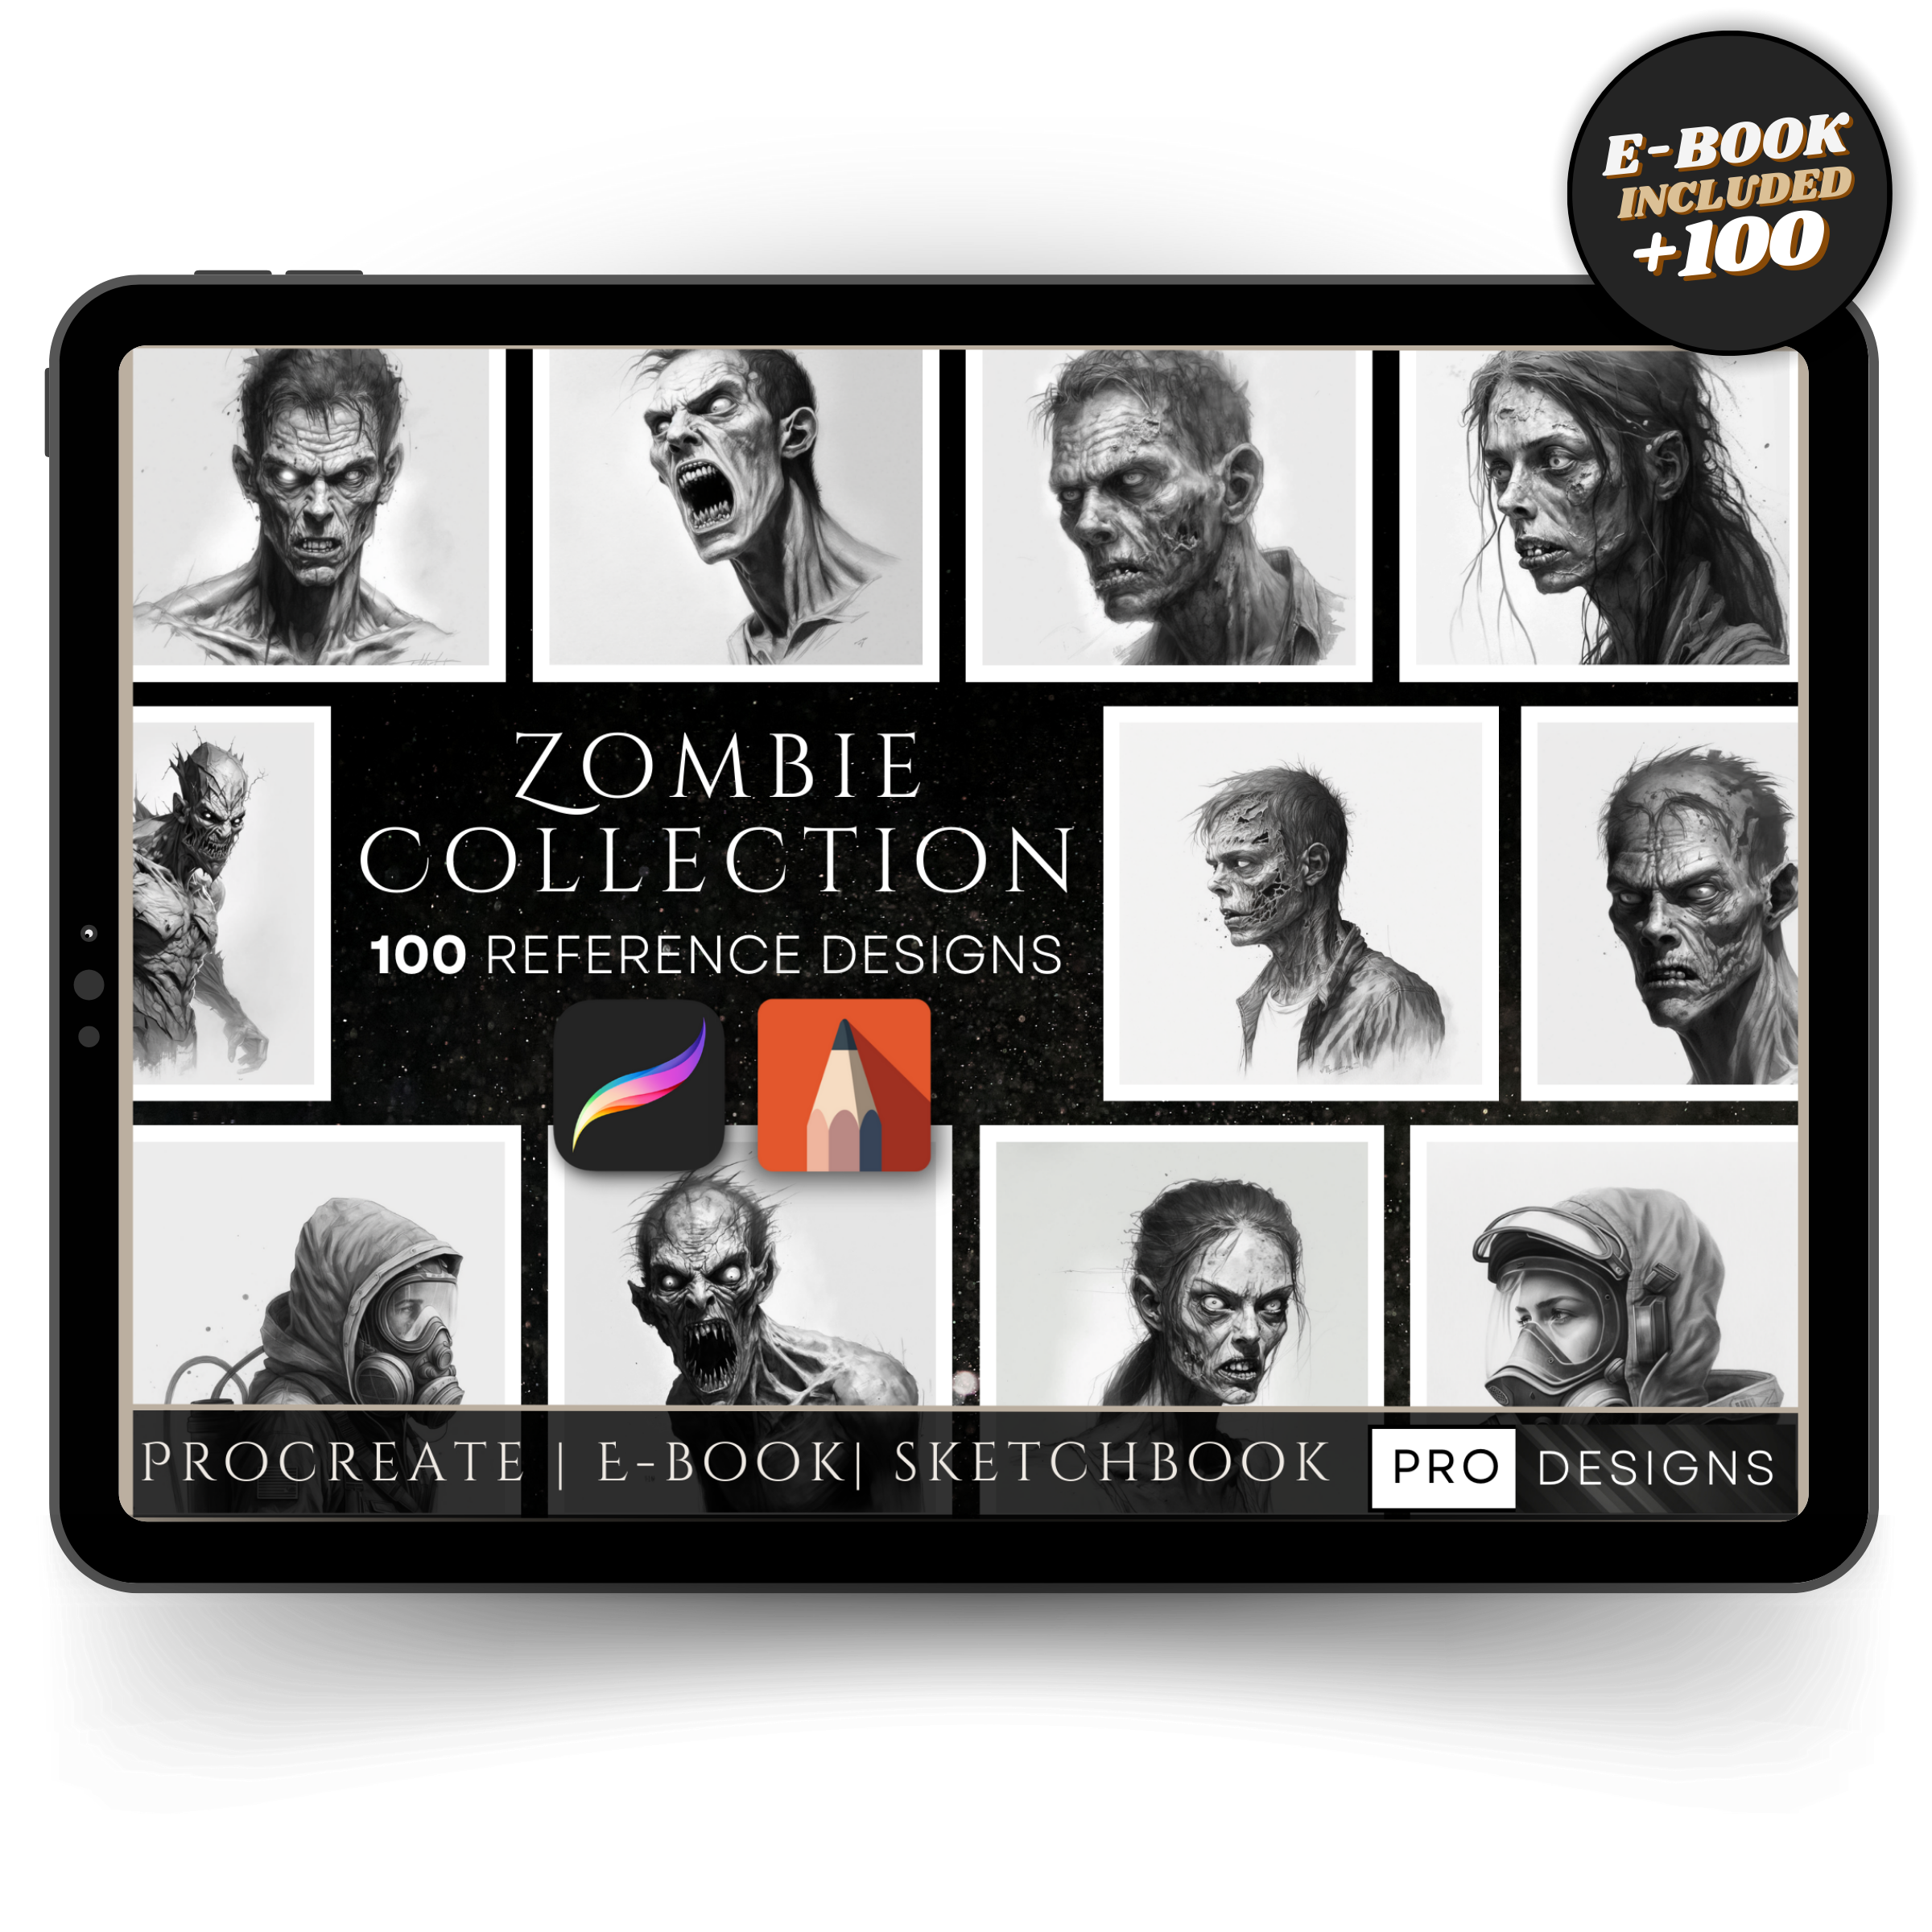 "Apocalypse Rising" - The Zombie Collection